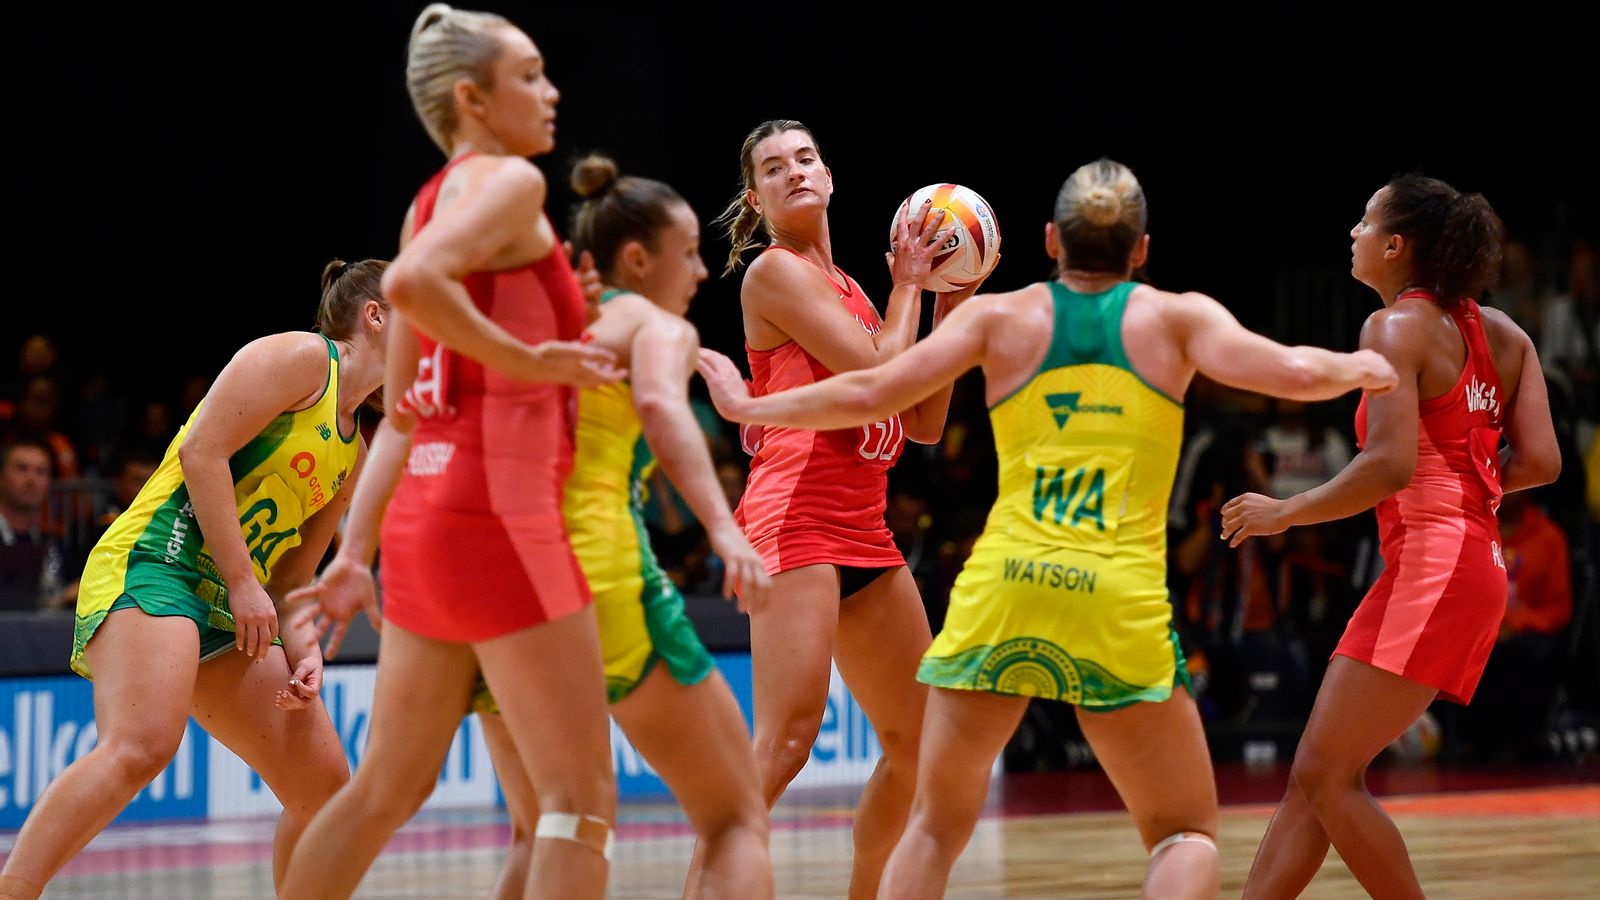 England fall short in final as Australia win Netball World Cup as it